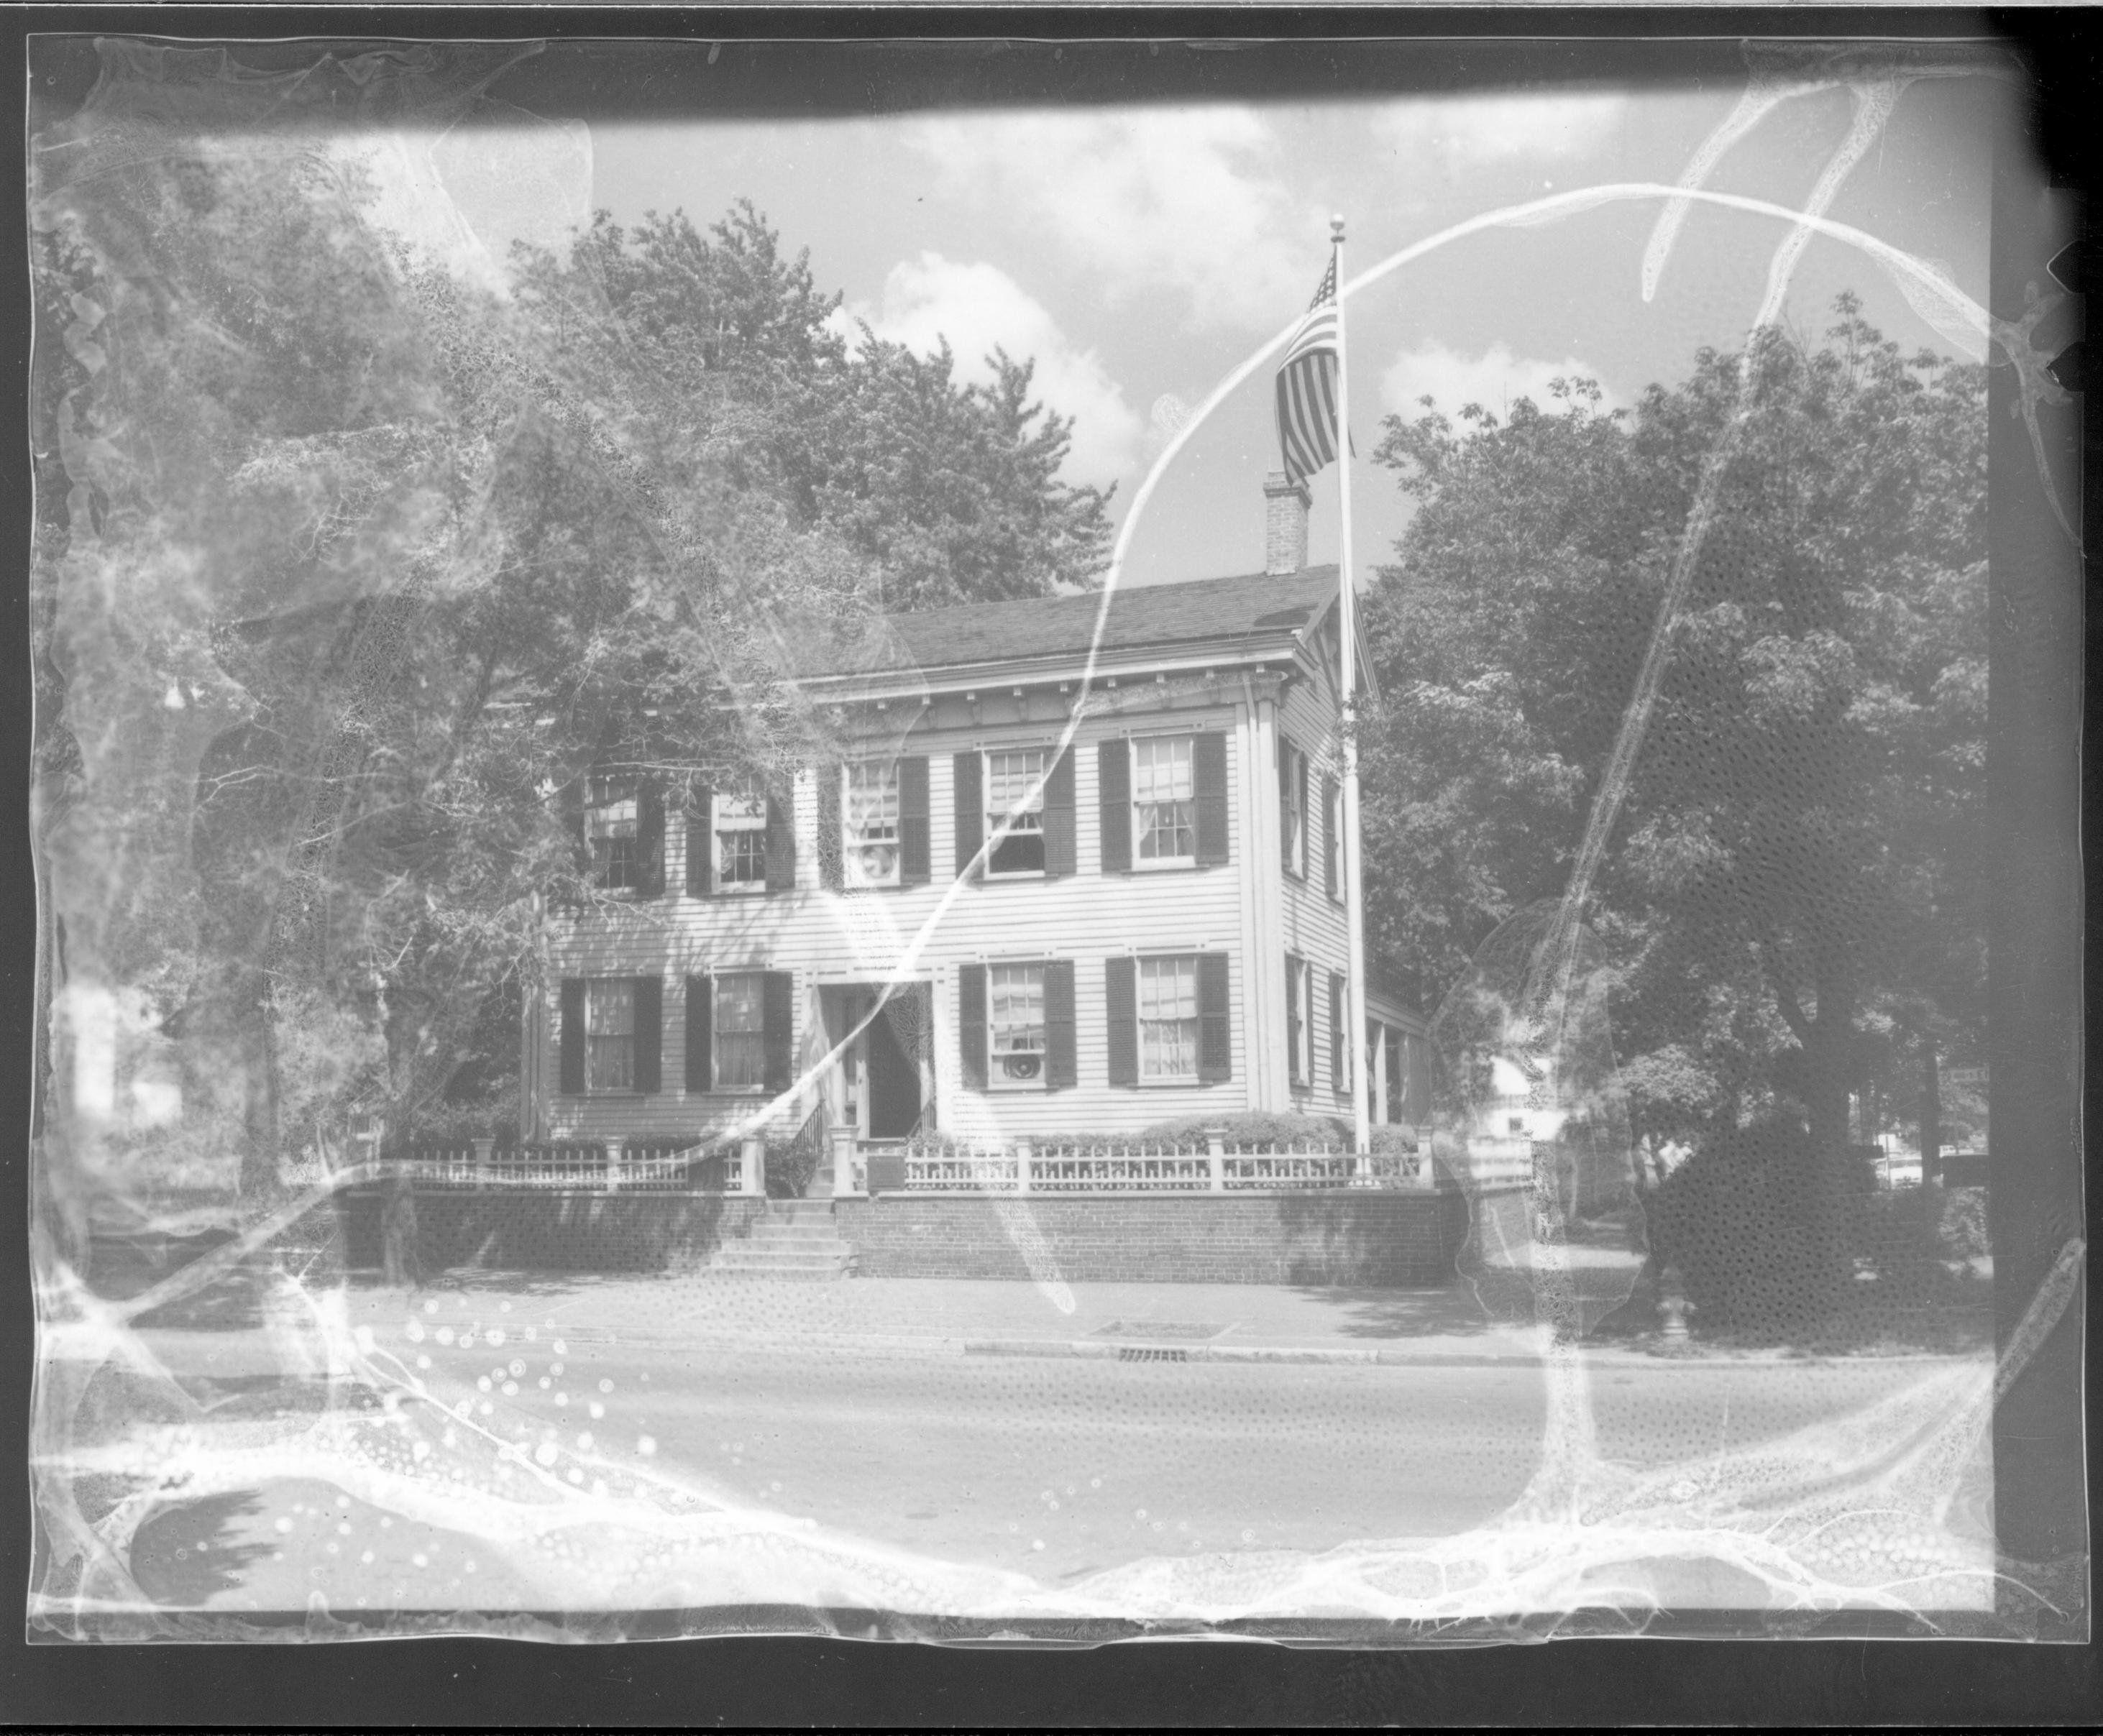 Lincoln Home west (front) elevation in summer surrounded by trees. Flagpole on corner behind picket fence, fire hydrant visible on corner near street. Two-story houses visible on far left and behind Lincoln Home. House appears to be painted white. Looking East/Northeast from 8th and Jackson Street intersection. Negative deteriorating Lincoln Home, flagpole, fire hydrant, 8th Street, painted white, summer